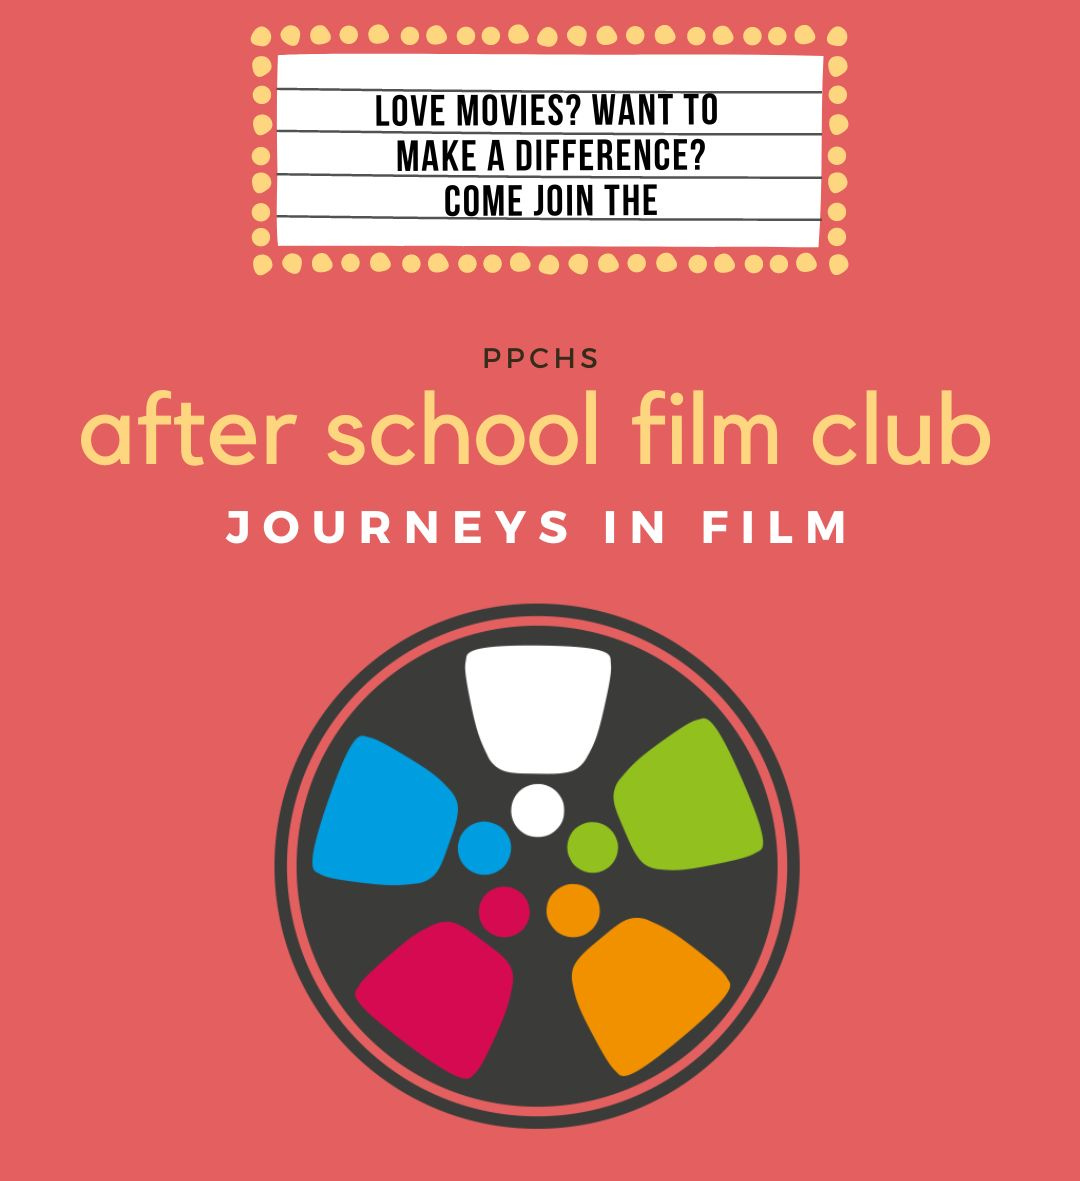 Promotional flyer image for film club featuring the Journeys in Film logo and a movie style sign with text: Watch movies, make a difference, come join the inside the sign and then the after school film club text below